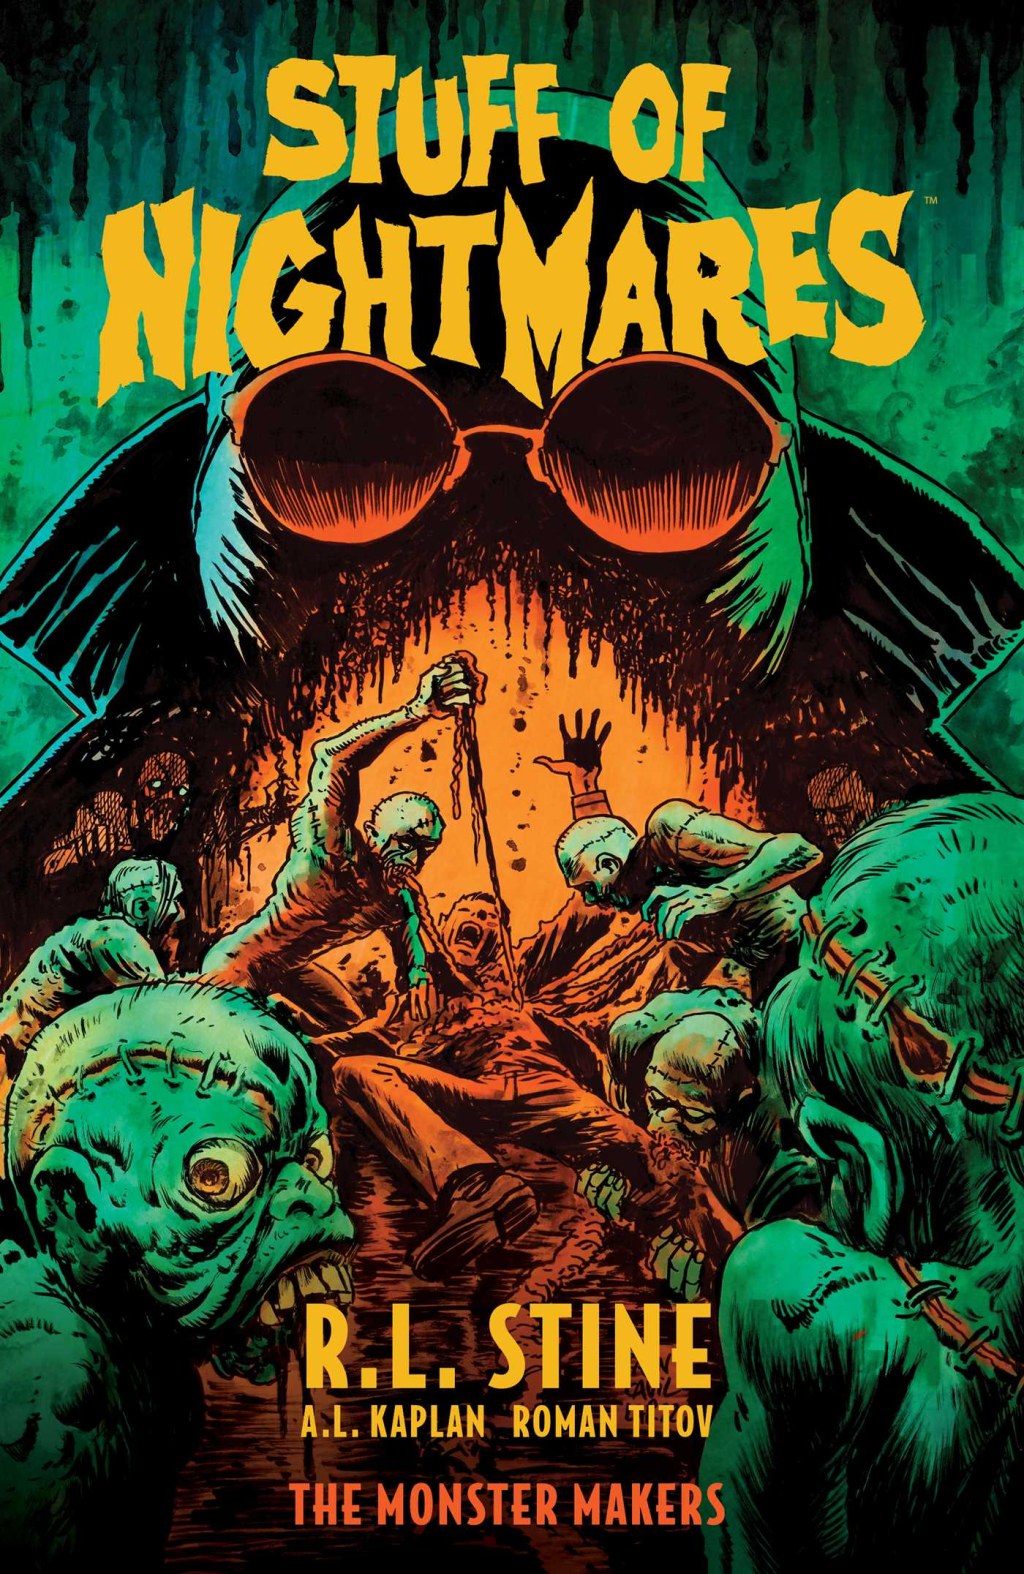 Picture of: Stuff of Nightmares  Book by R.L. (Robert) Stine, A.L